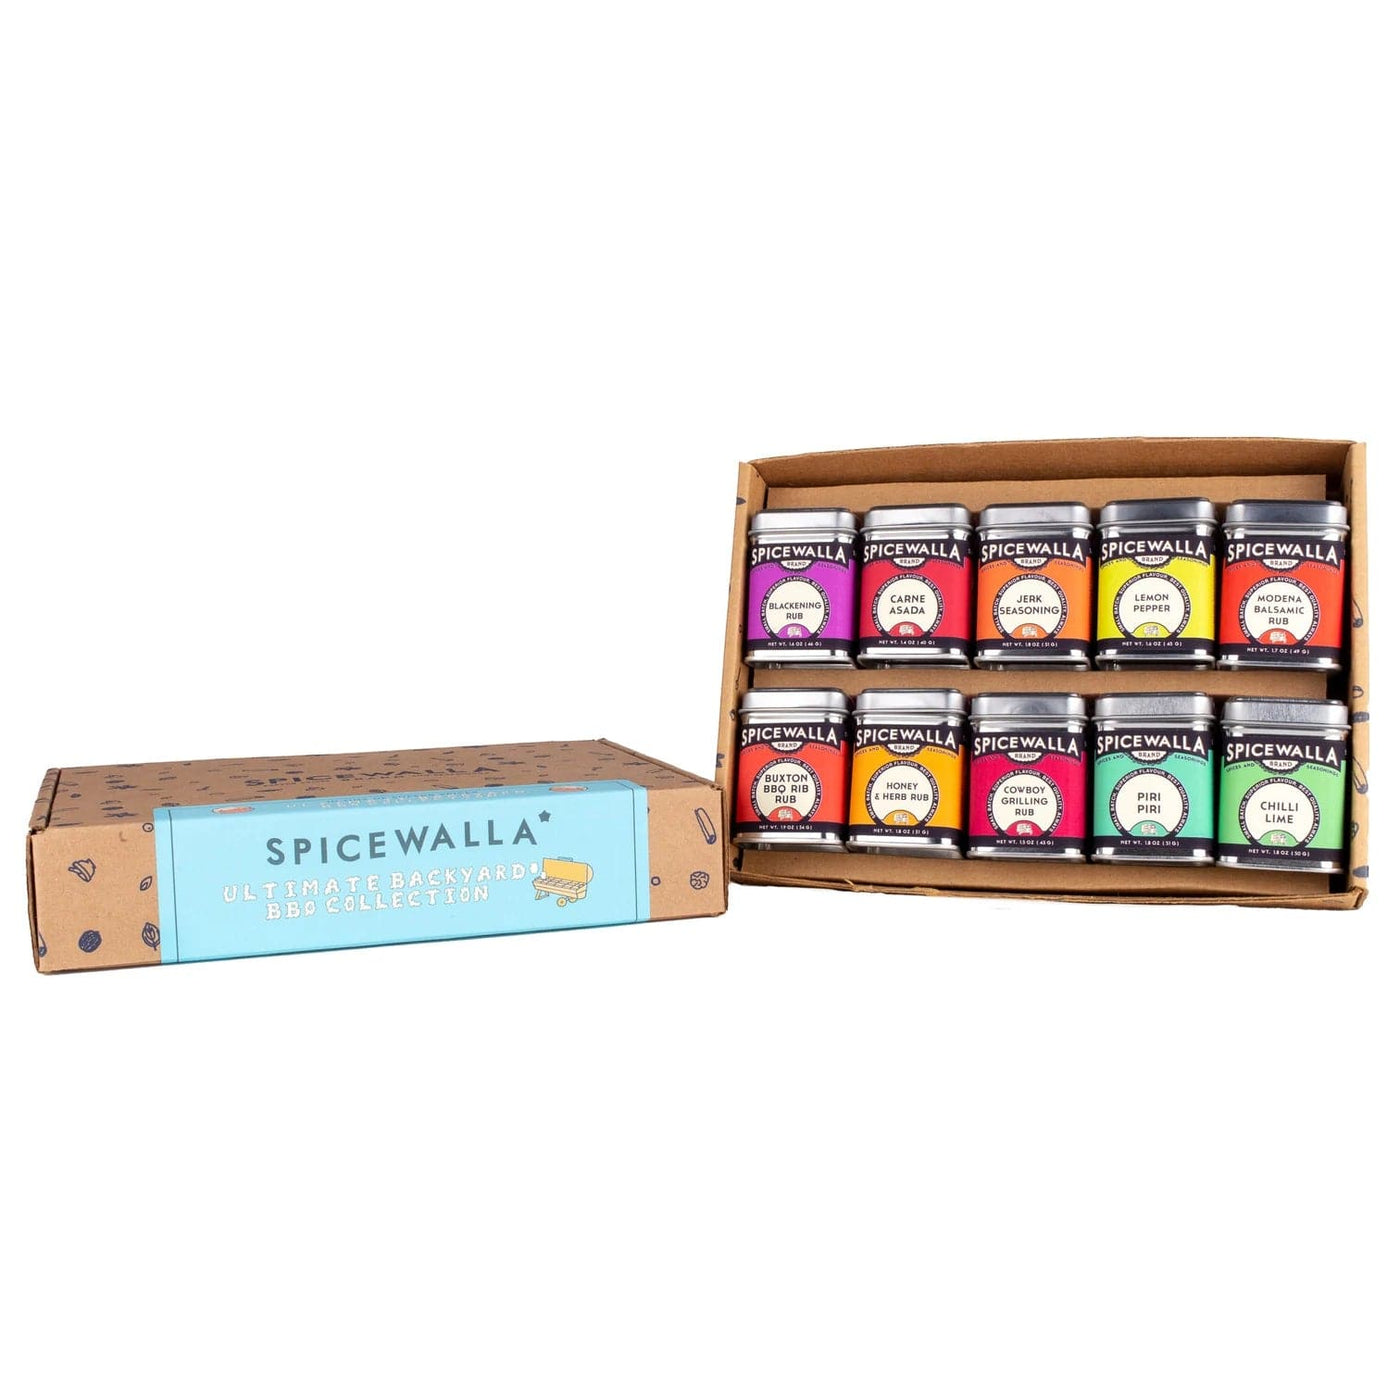 Spices & Seasonings 10-Pack Grill & Roast Collection - Giften Market 